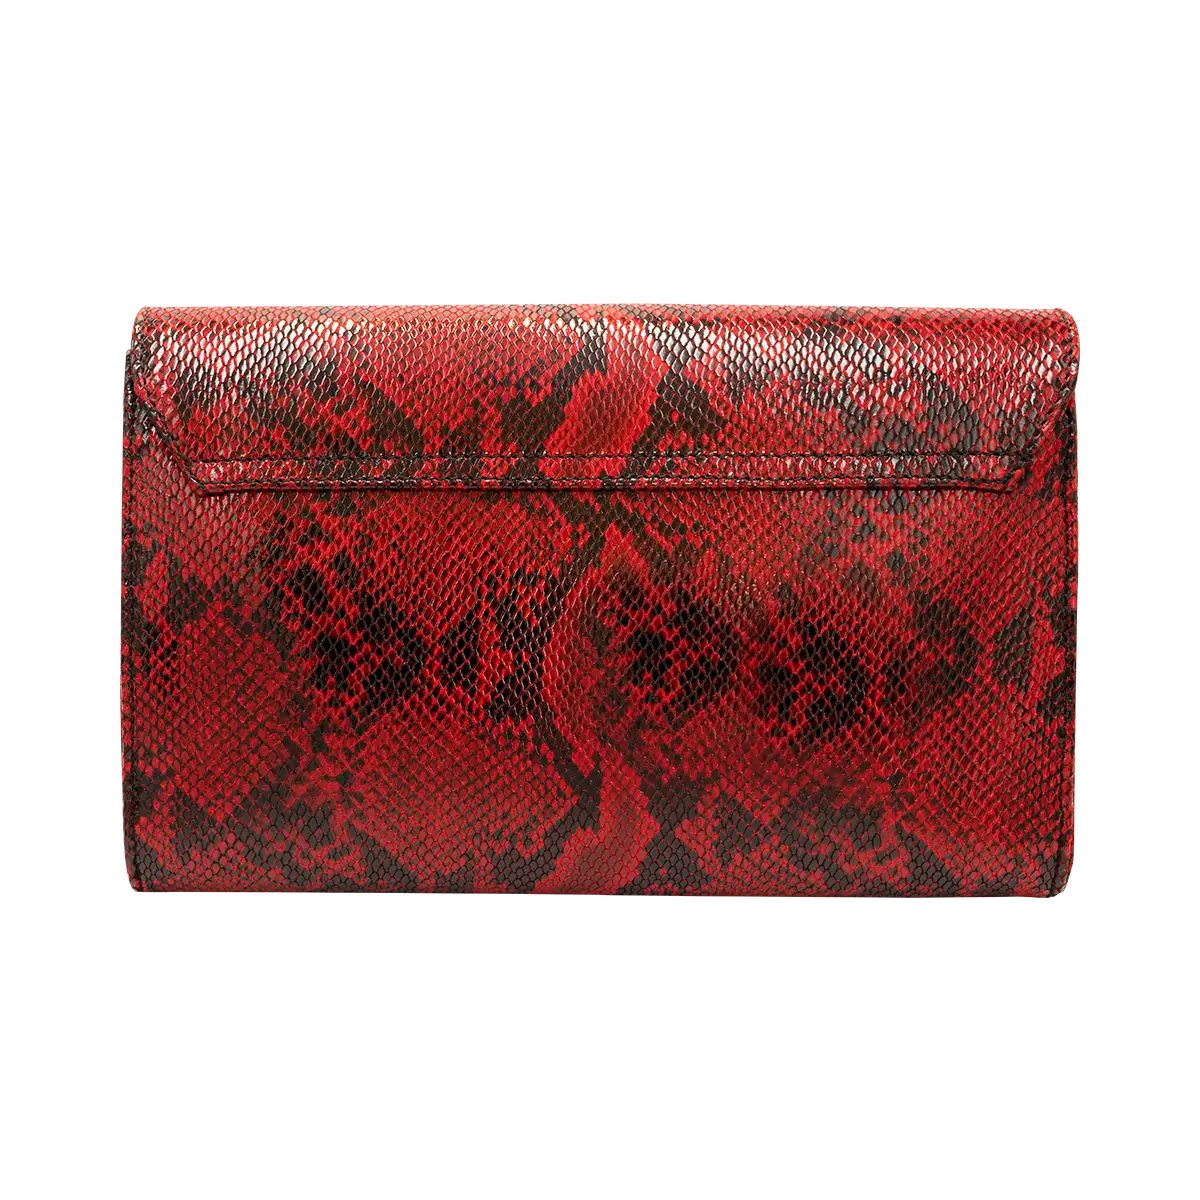 large red print print leather clutch with strap. Fashion accessory for women in San Diego, CA.